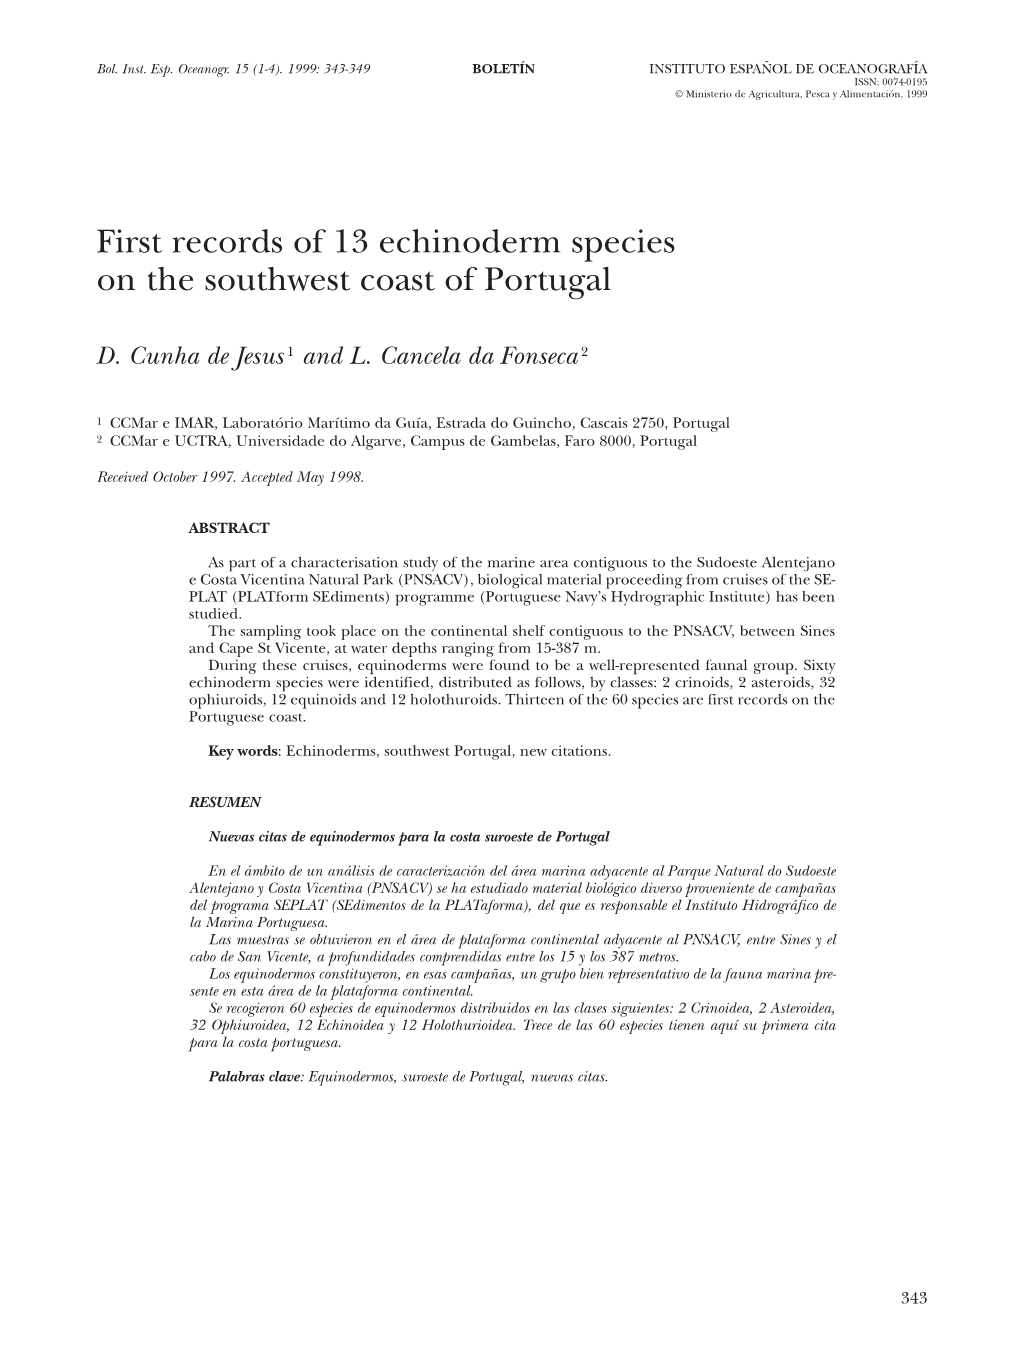 First Records of 13 Echinoderm Species on the Southwest Coast of Portugal